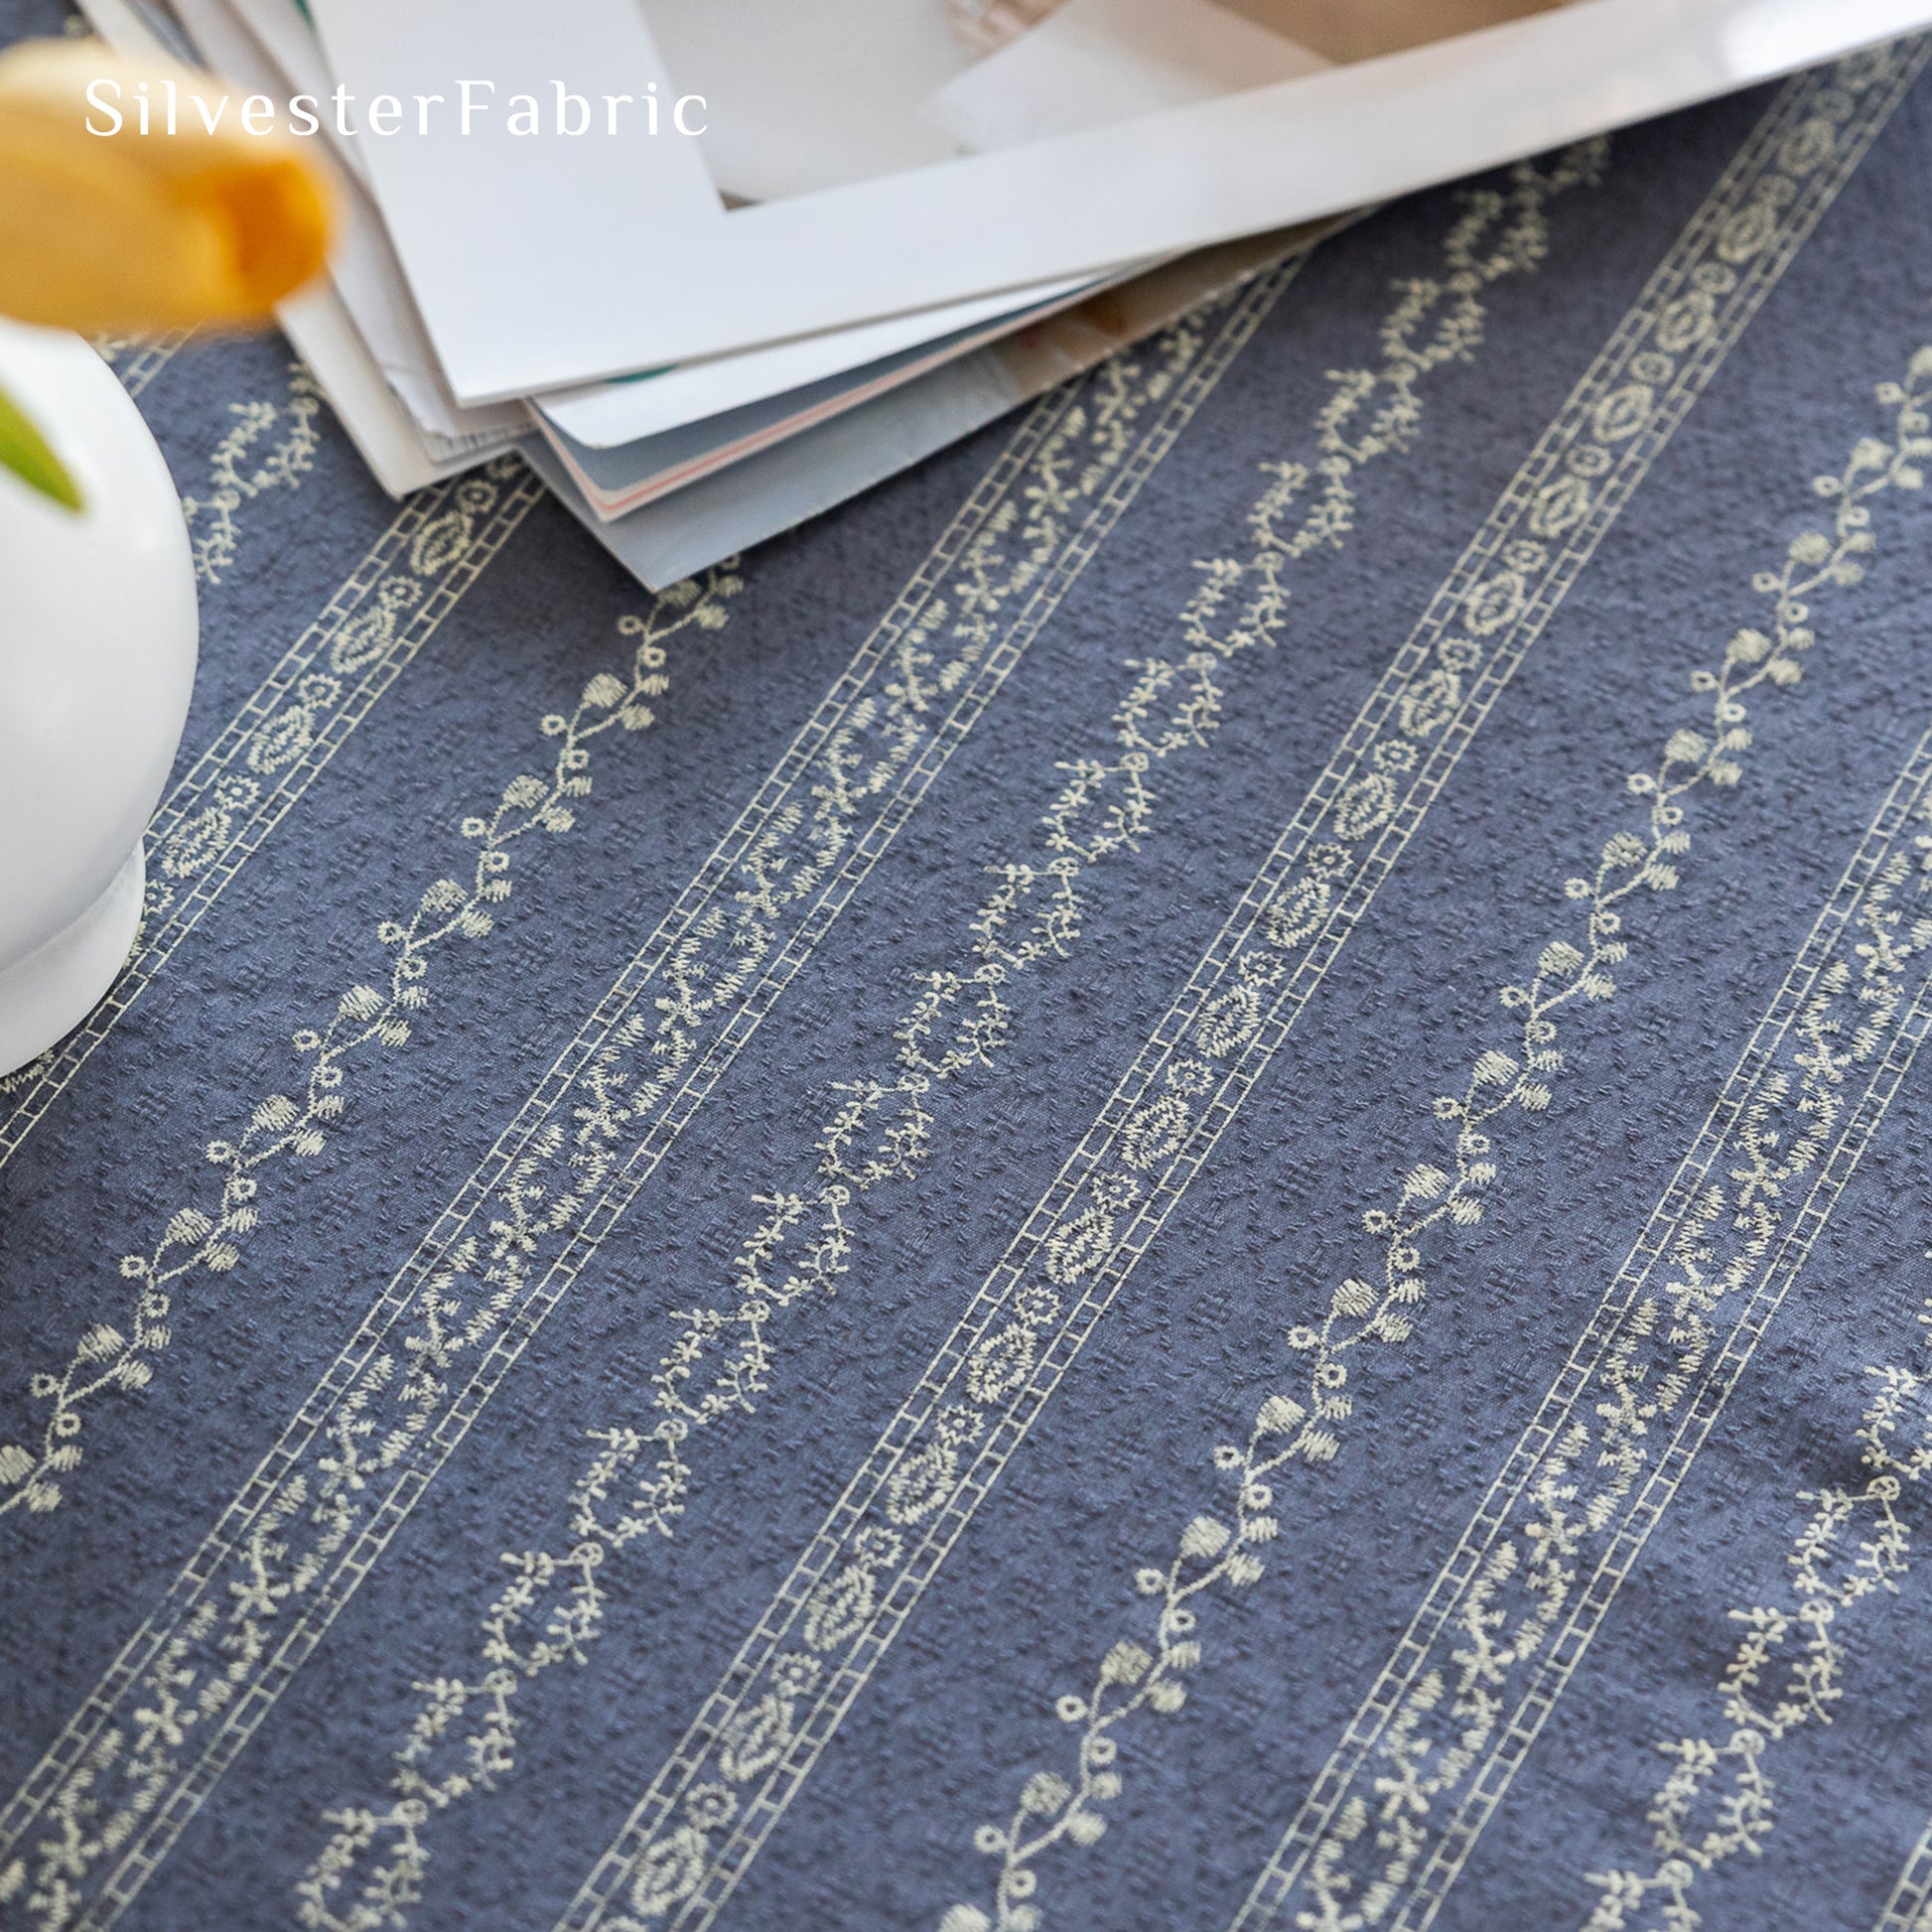 Dusty Blue Round Tablecloth丨Free Shipping - Silvester Fabric